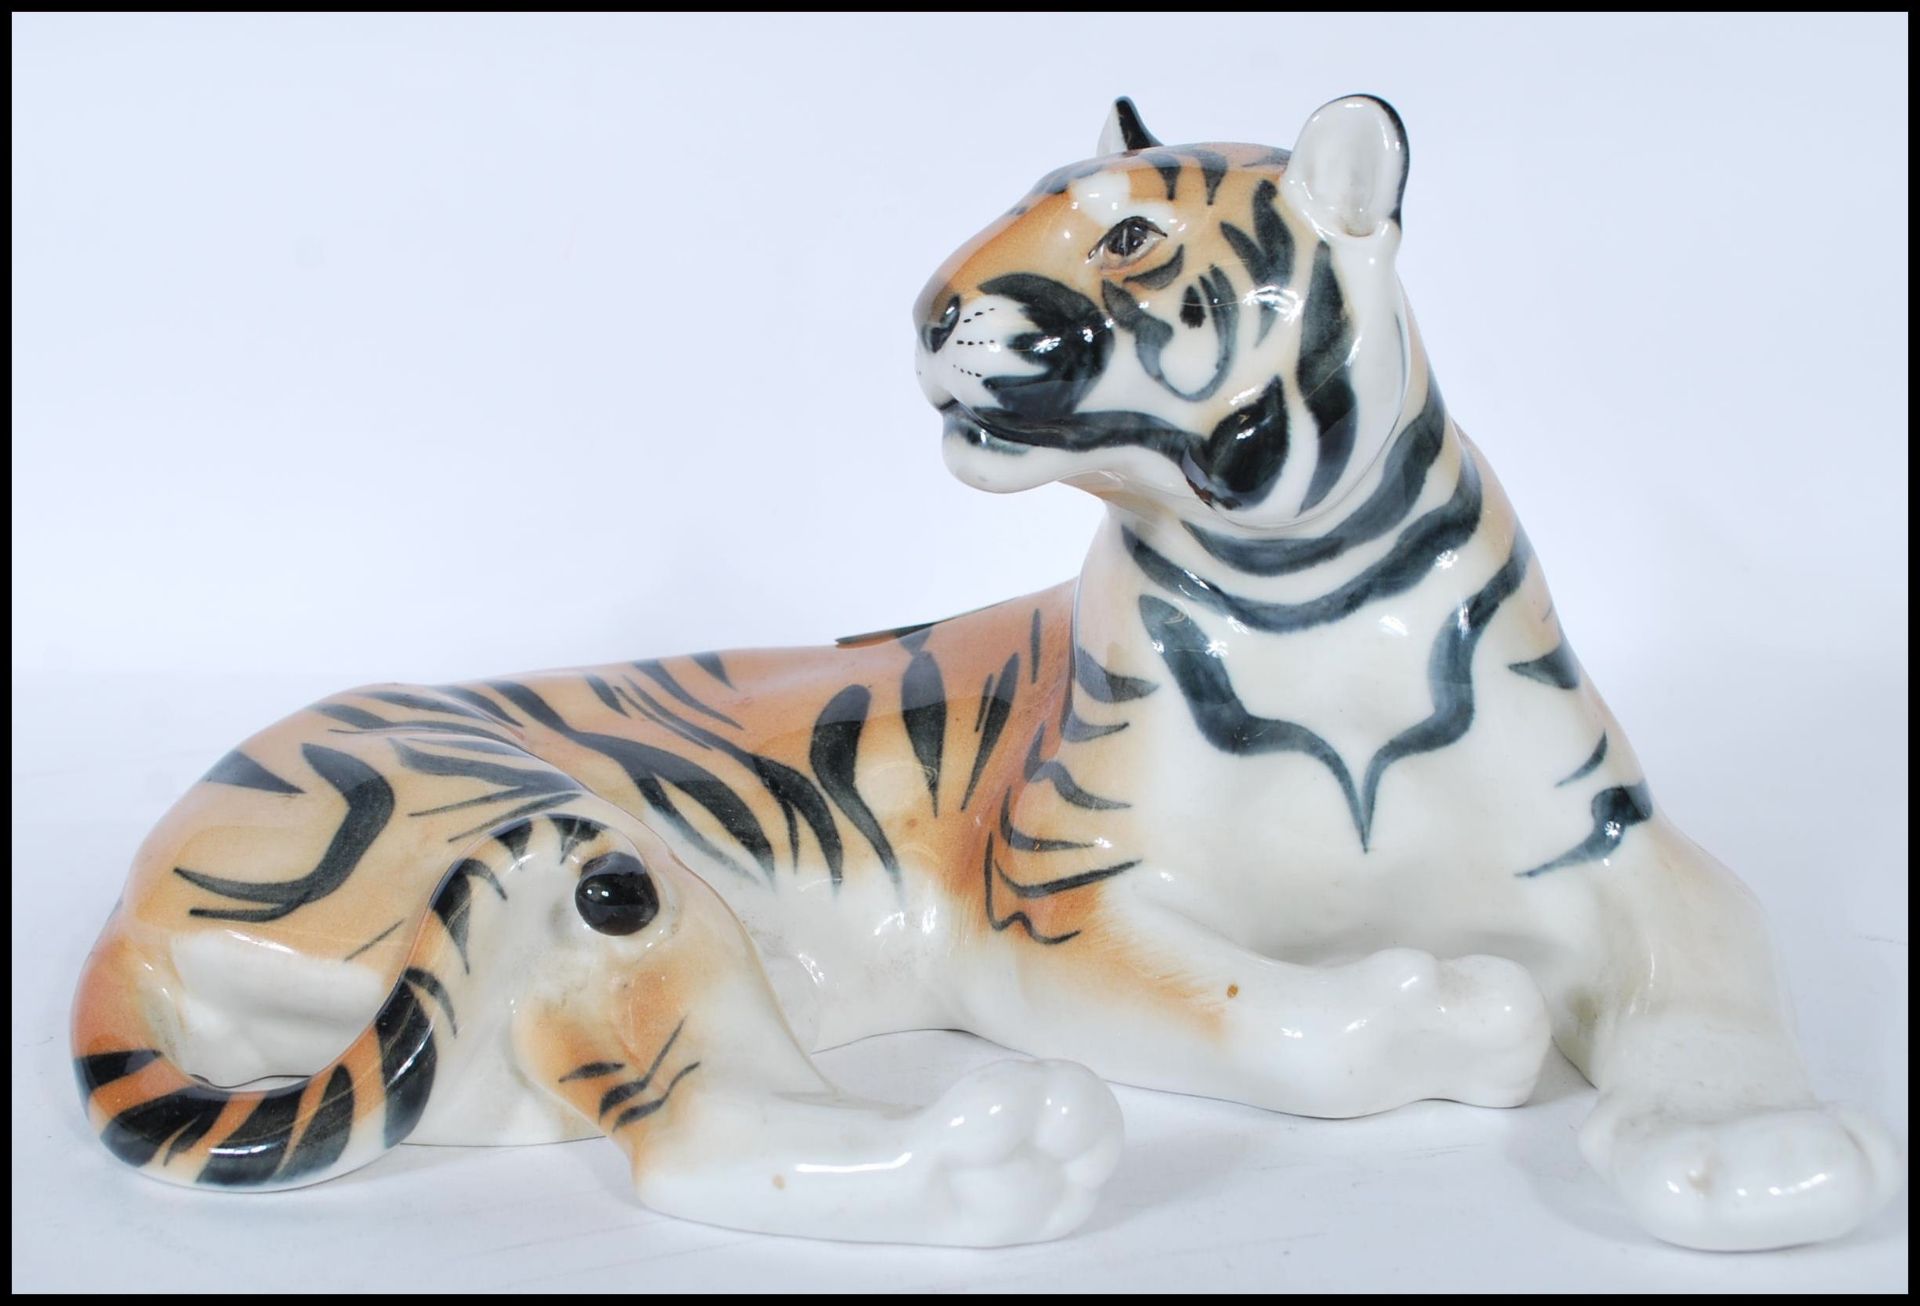 A large  20th century porcelain USSR / Russian porcelain figurine of a recumbent tiger being stamped